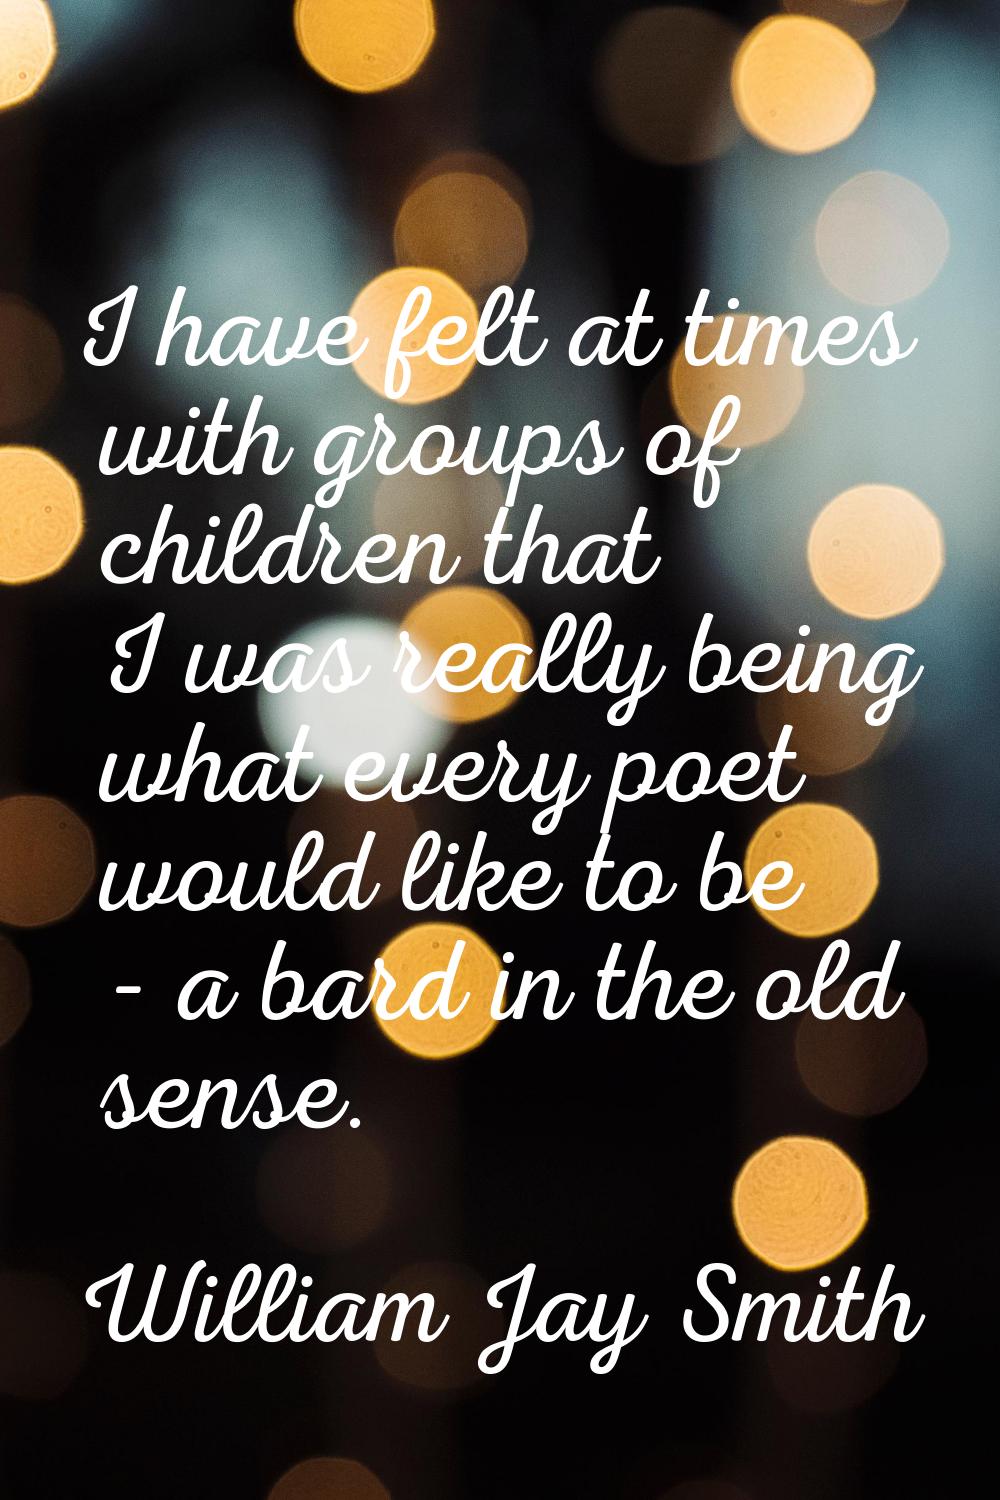 I have felt at times with groups of children that I was really being what every poet would like to 